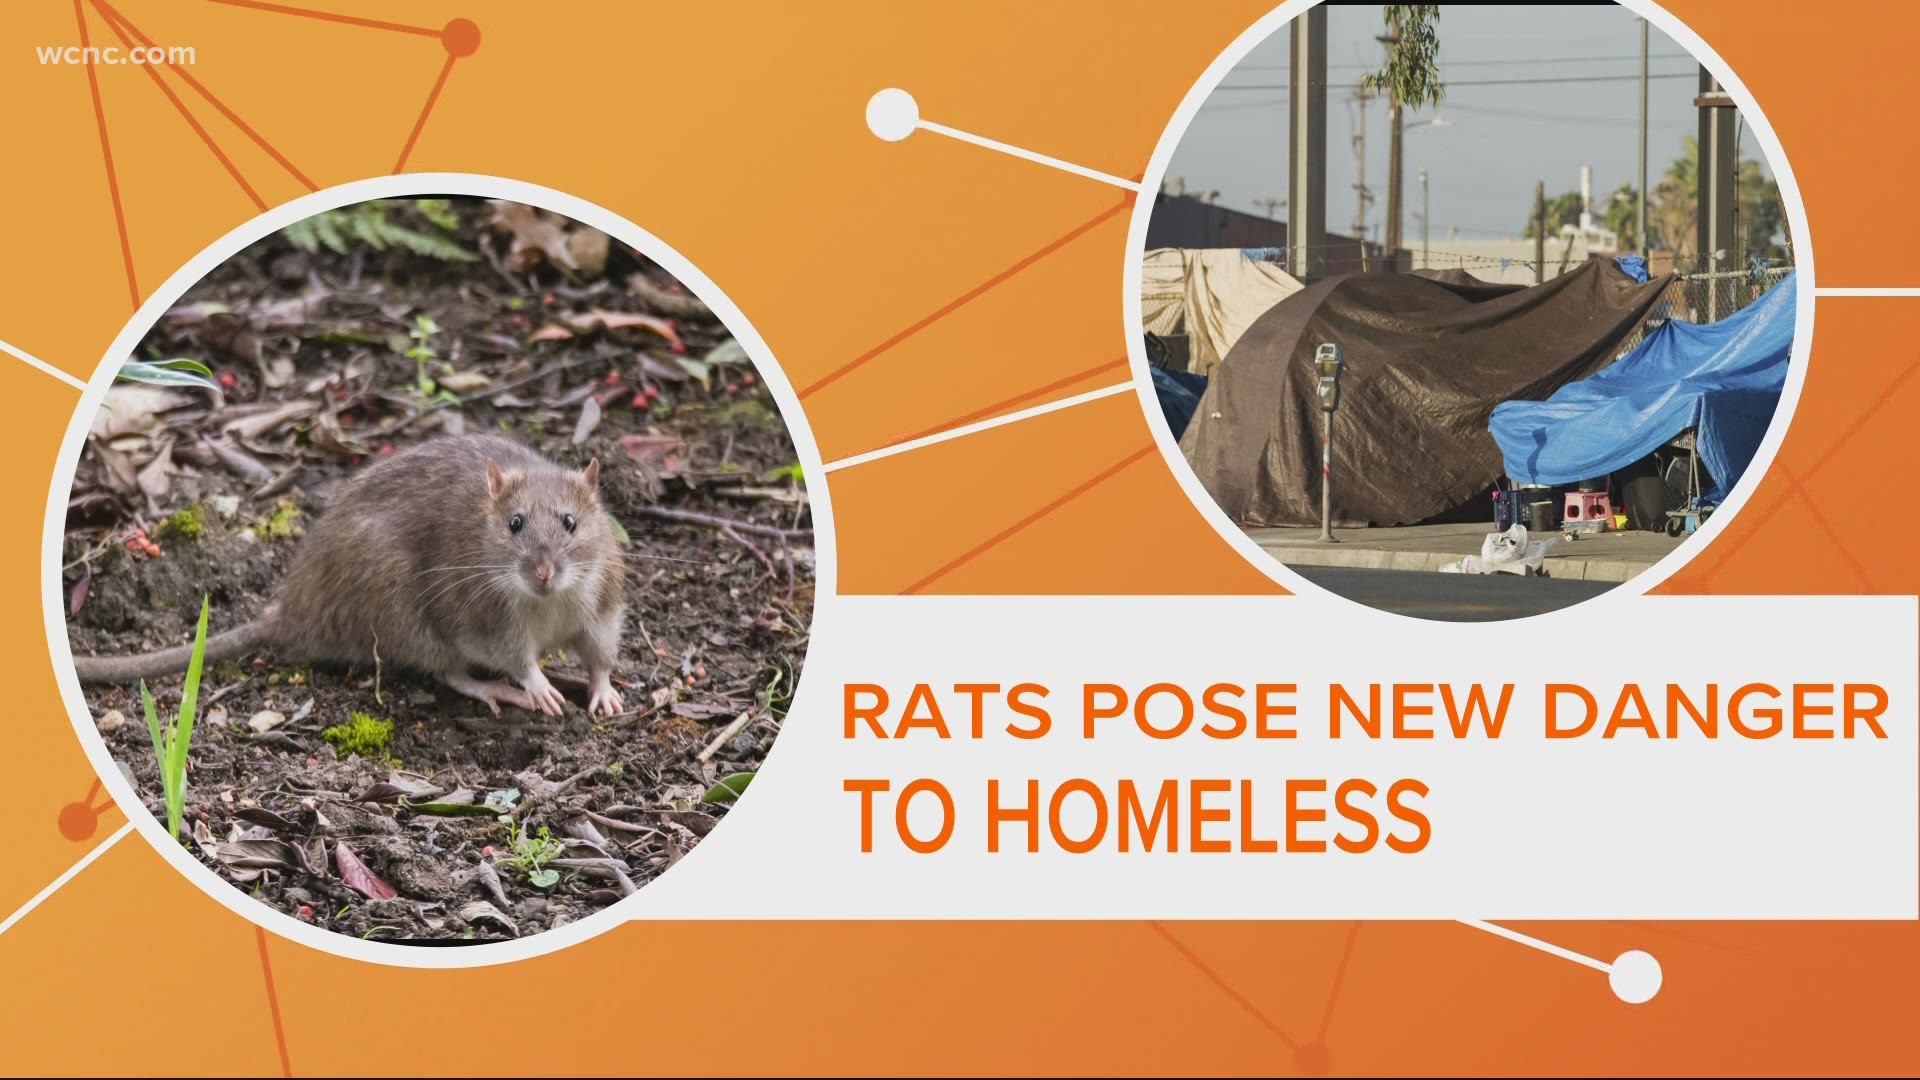 Residents in Charlotte's "tent city" must be evacuated because rats have taken over the place. It's a unique threat that creates a real public health threat.